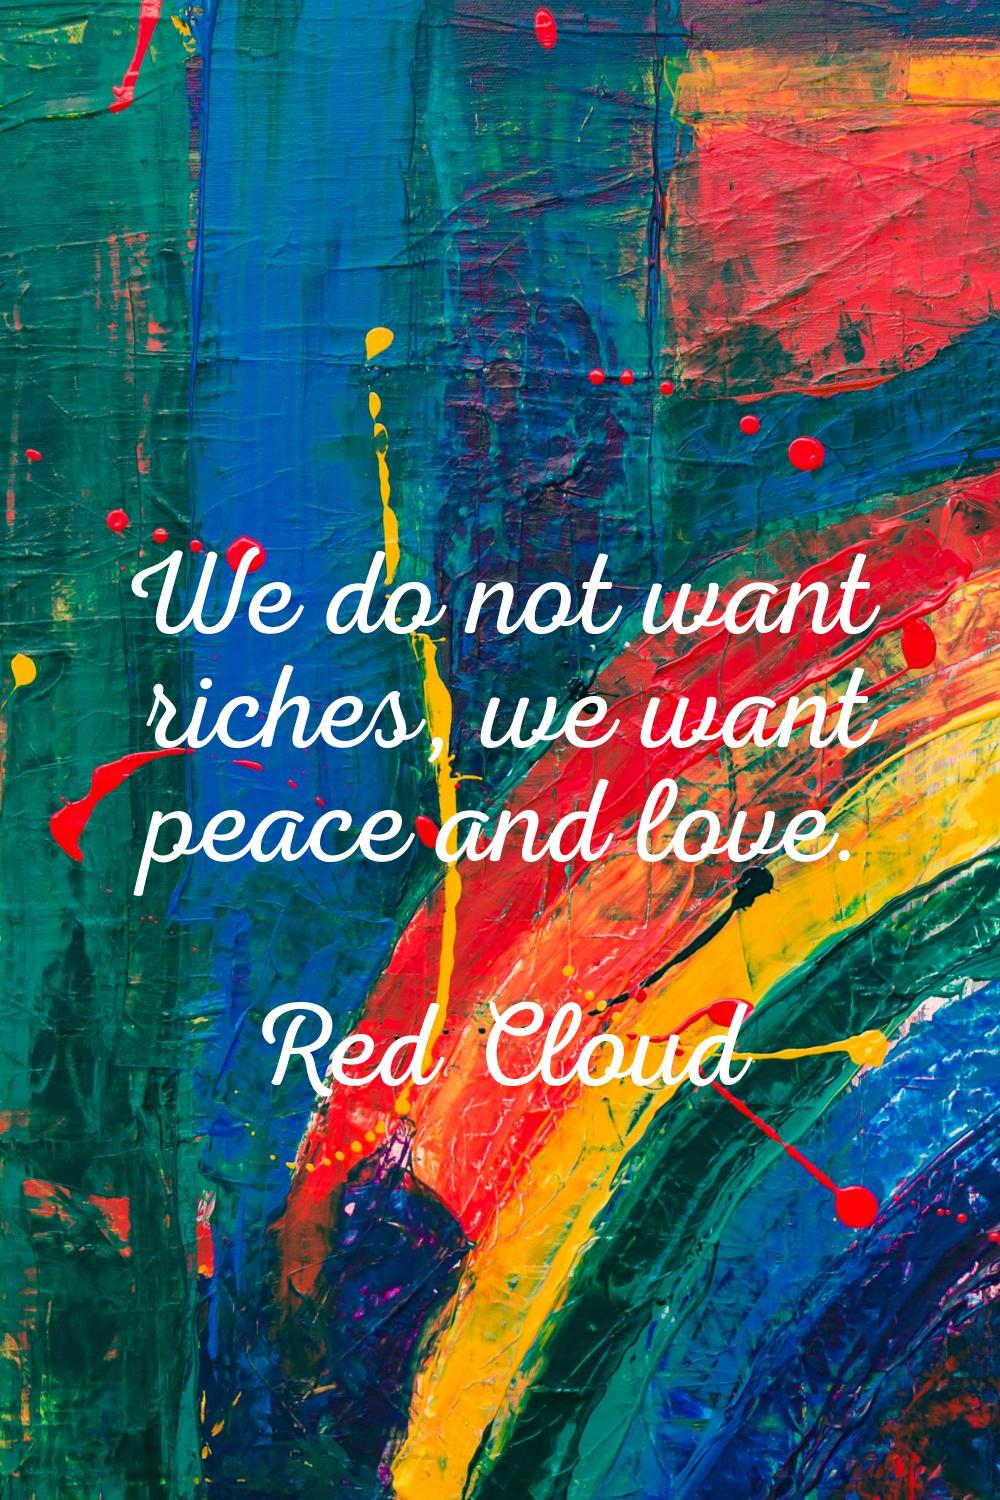 We do not want riches, we want peace and love.